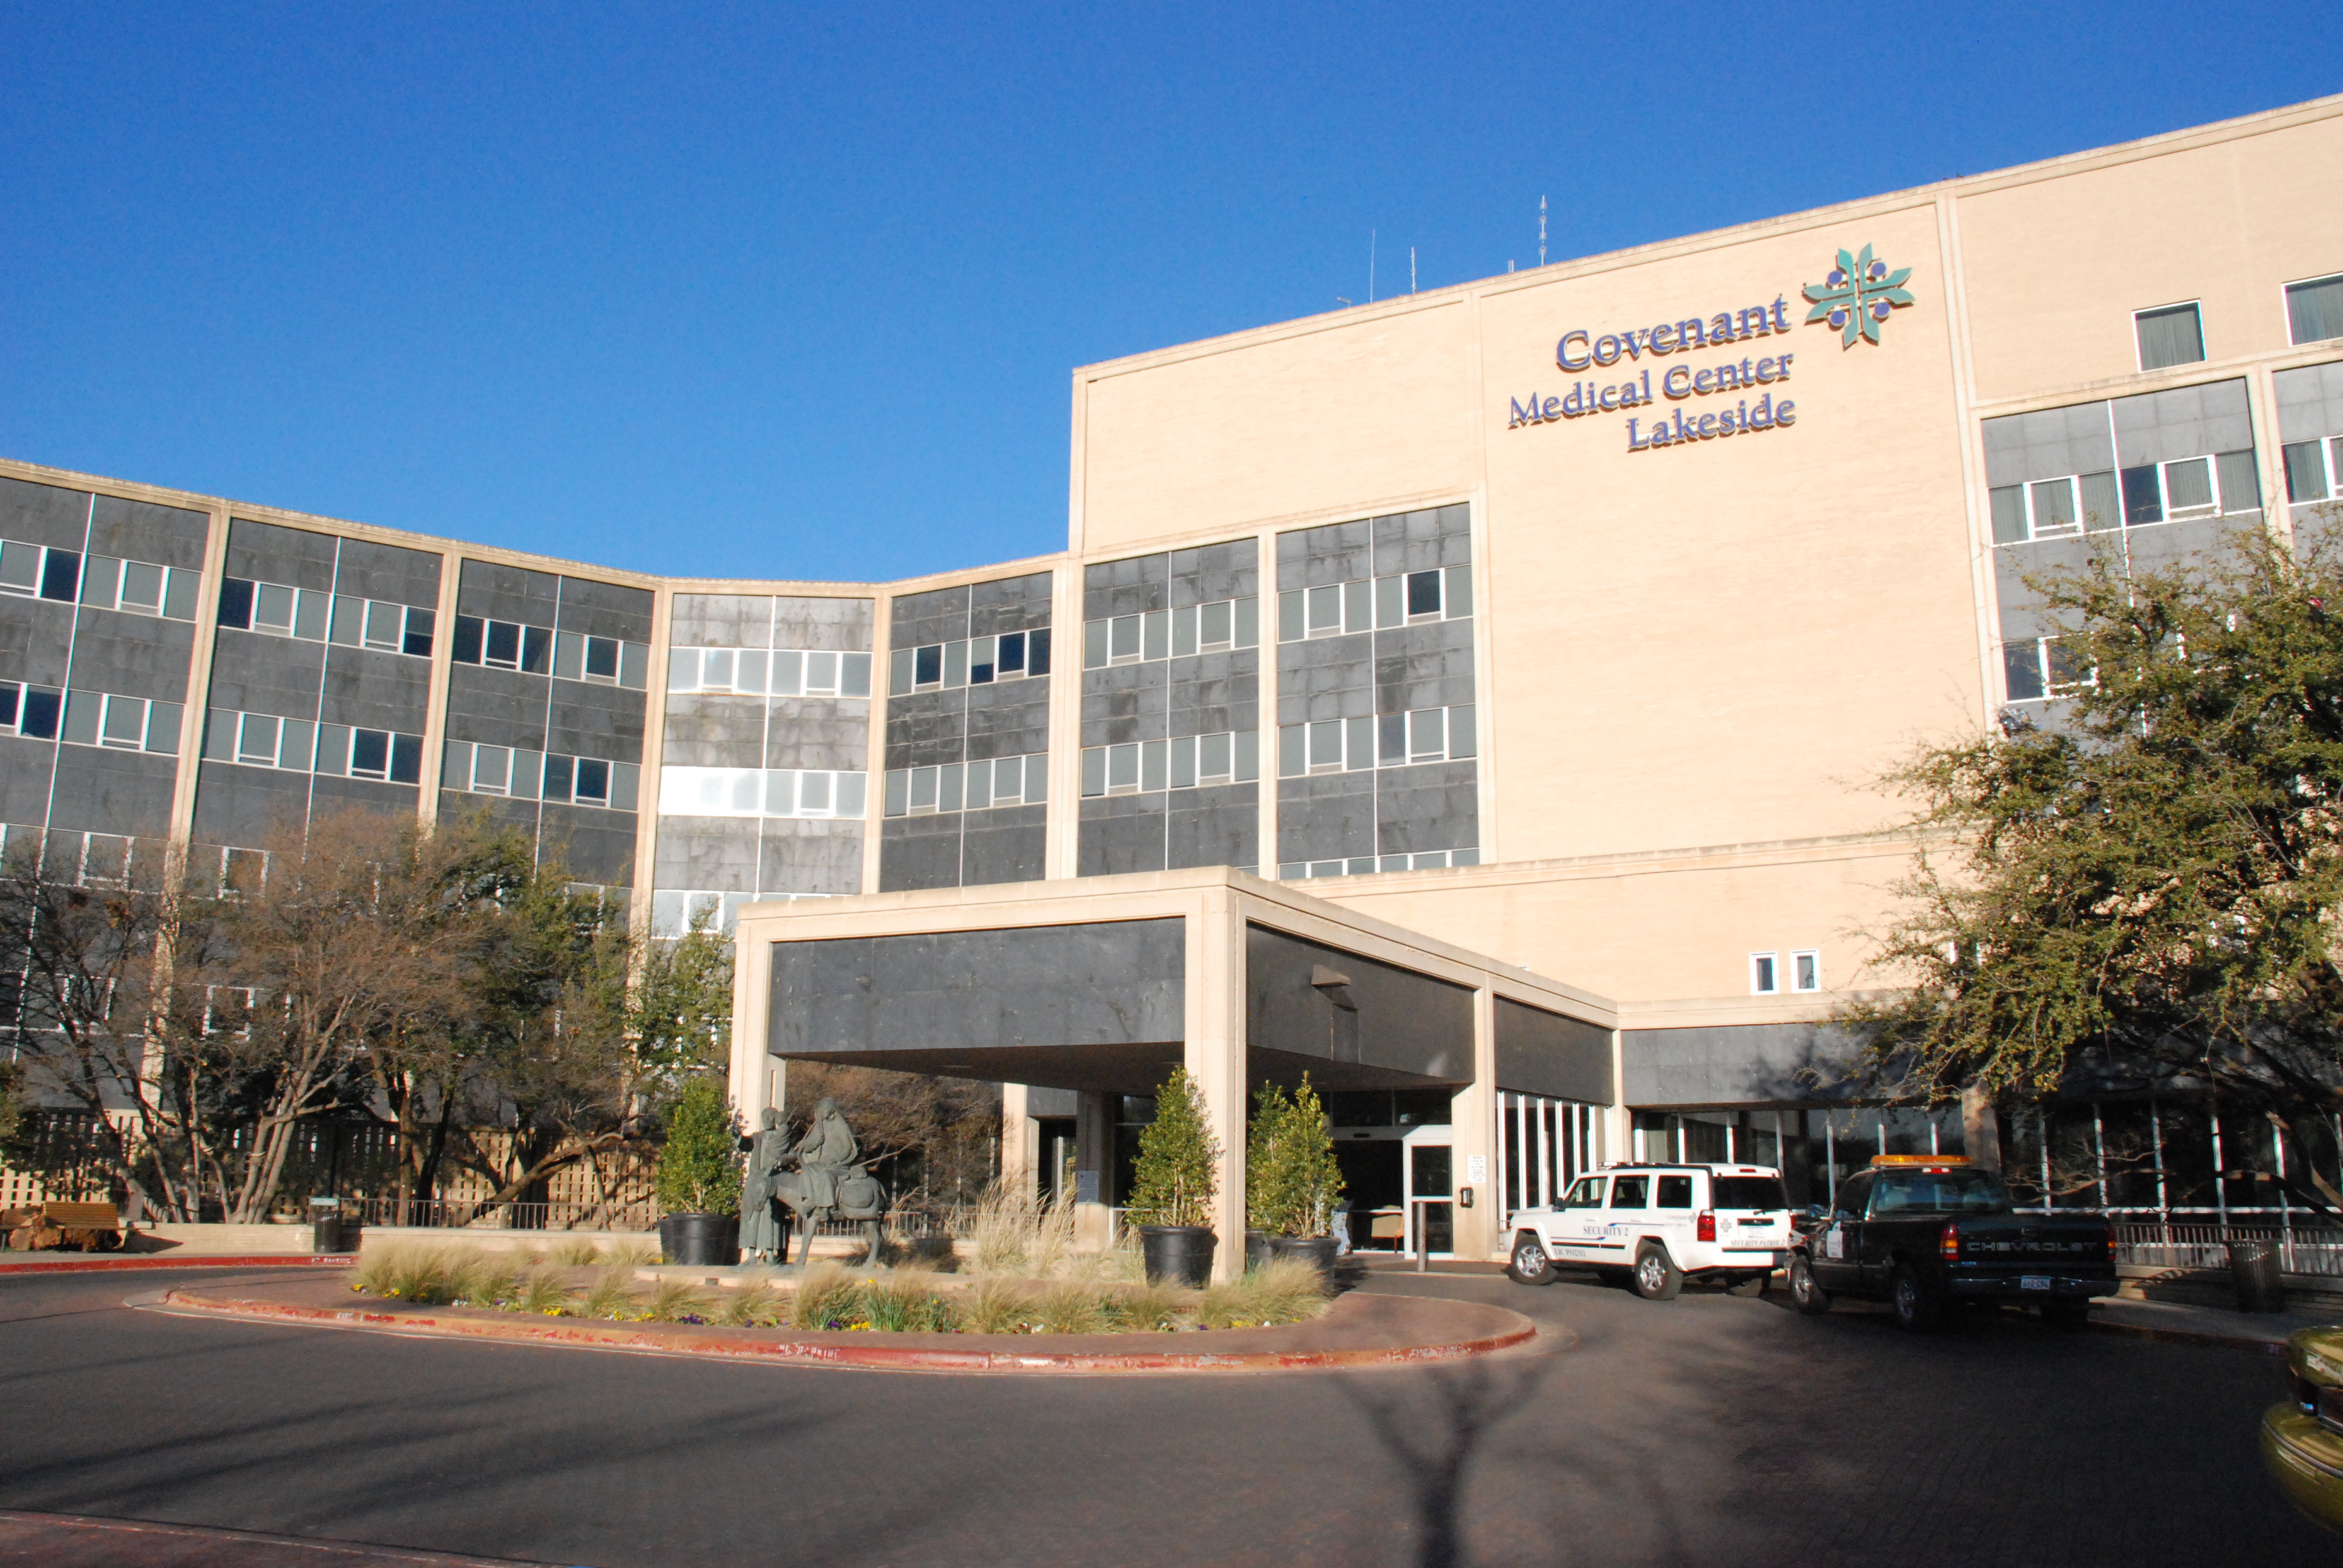  Covenant Medical Center Lakeside Expansion category